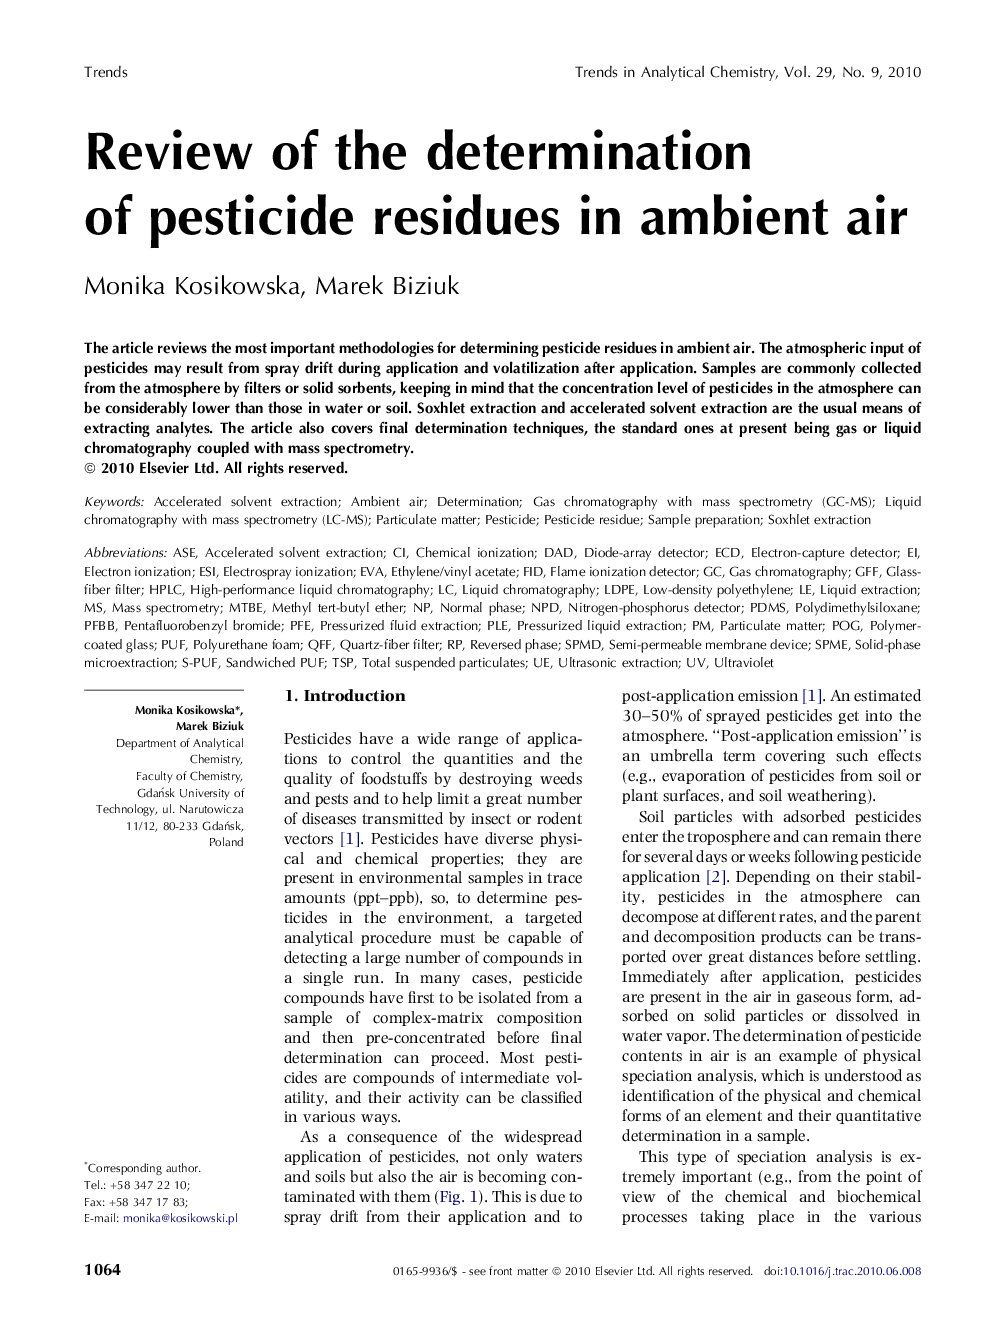 Review of the determination of pesticide residues in ambient air